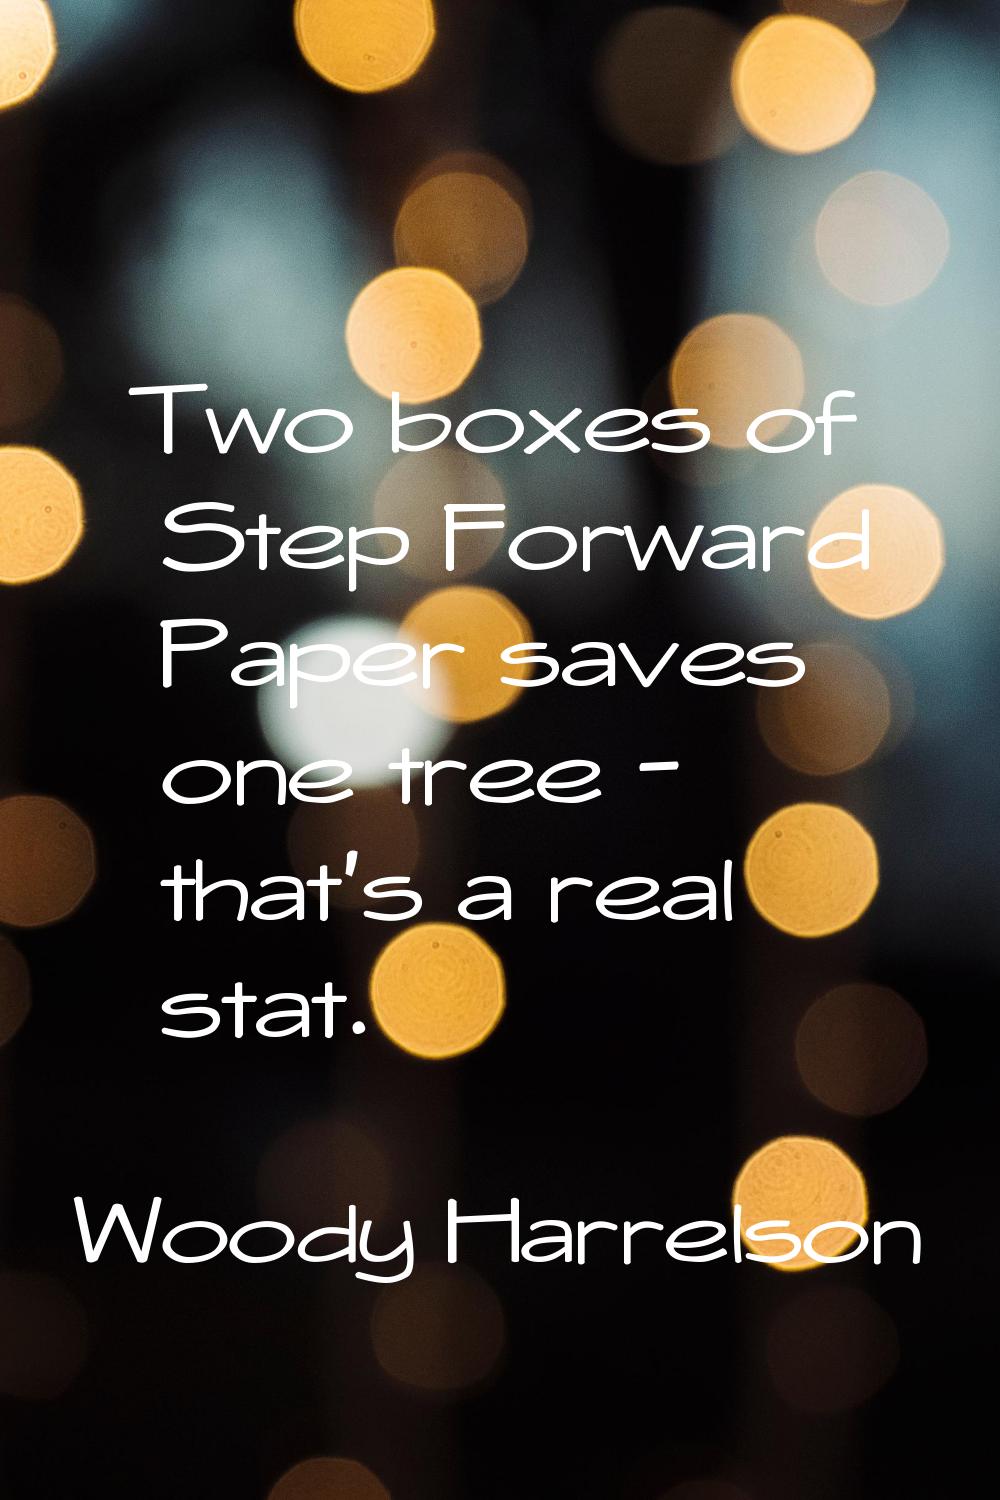 Two boxes of Step Forward Paper saves one tree - that's a real stat.